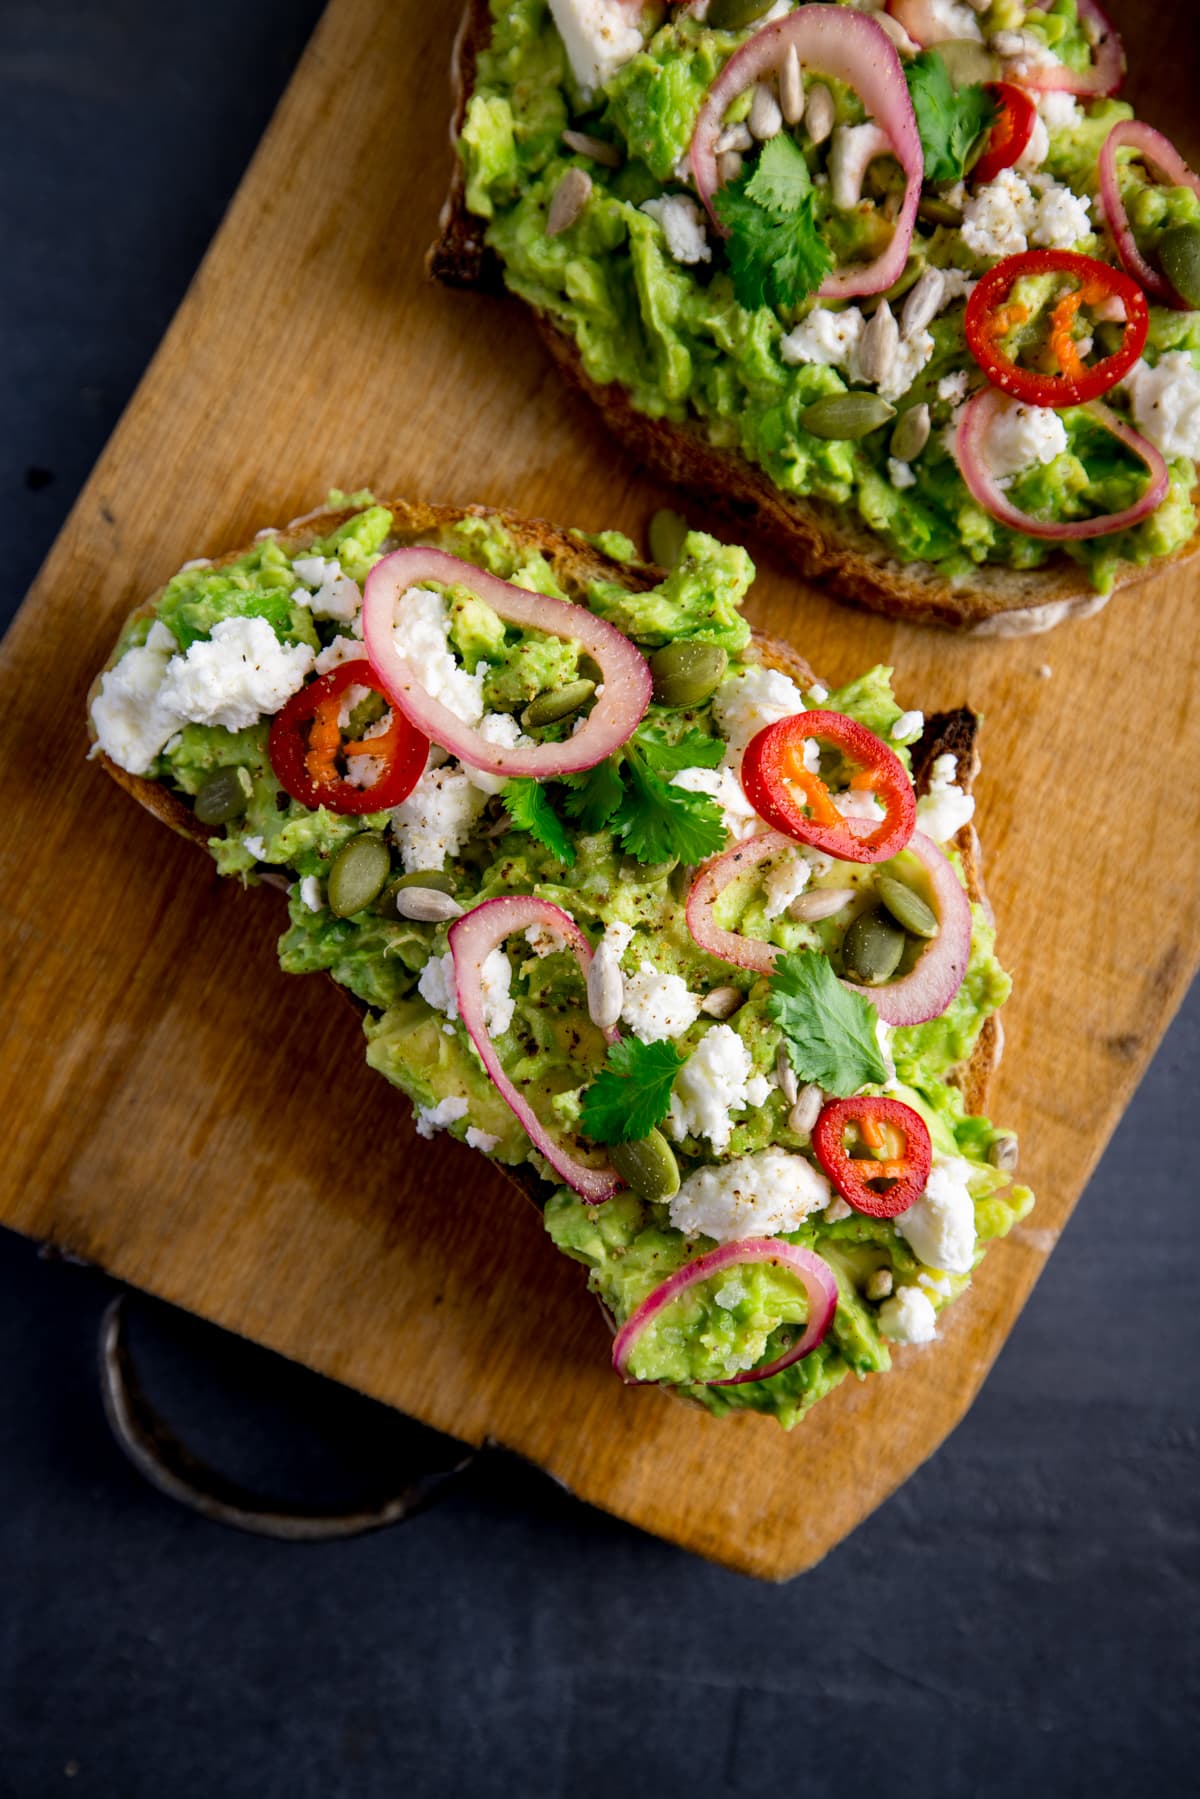 Two pieces of loaded avocado toast with feta, shallot, sliced red chilli, seeds and coriander (cilantro) on a wooden board on a dark grey background.